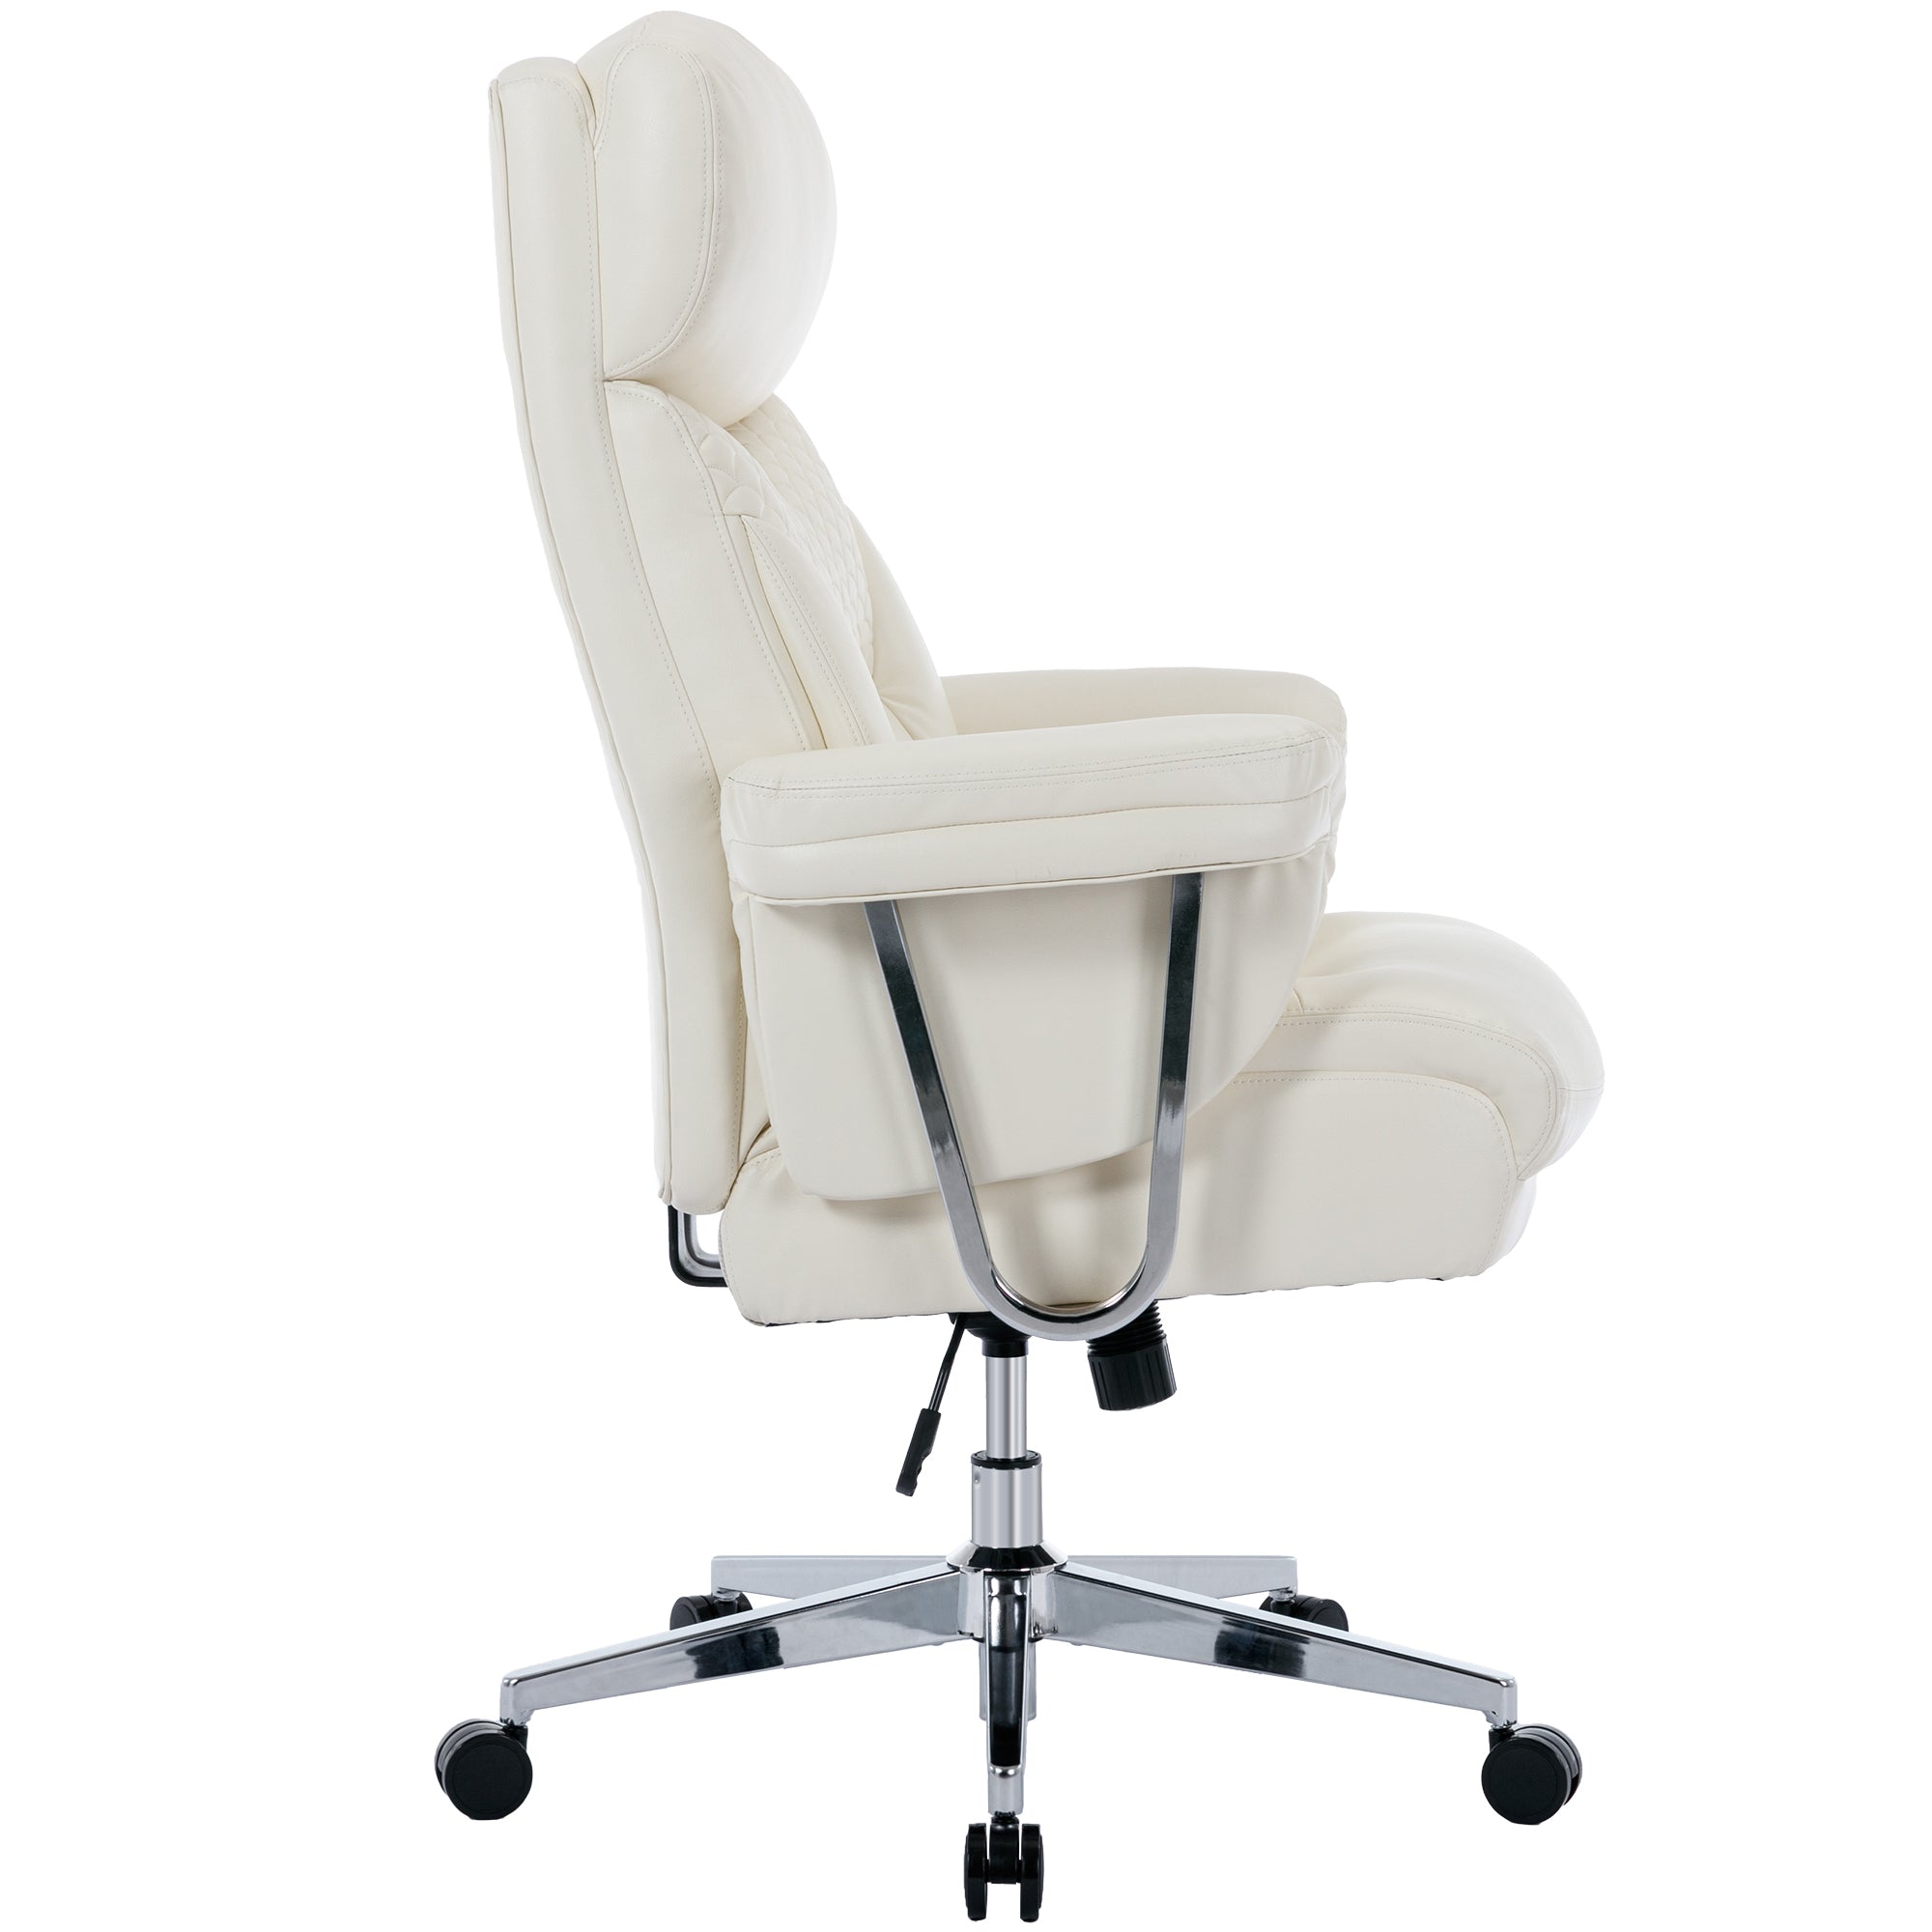 High Back Executive Office Chair 300lbs-Ergonomic Leather Computer Desk Chair - White